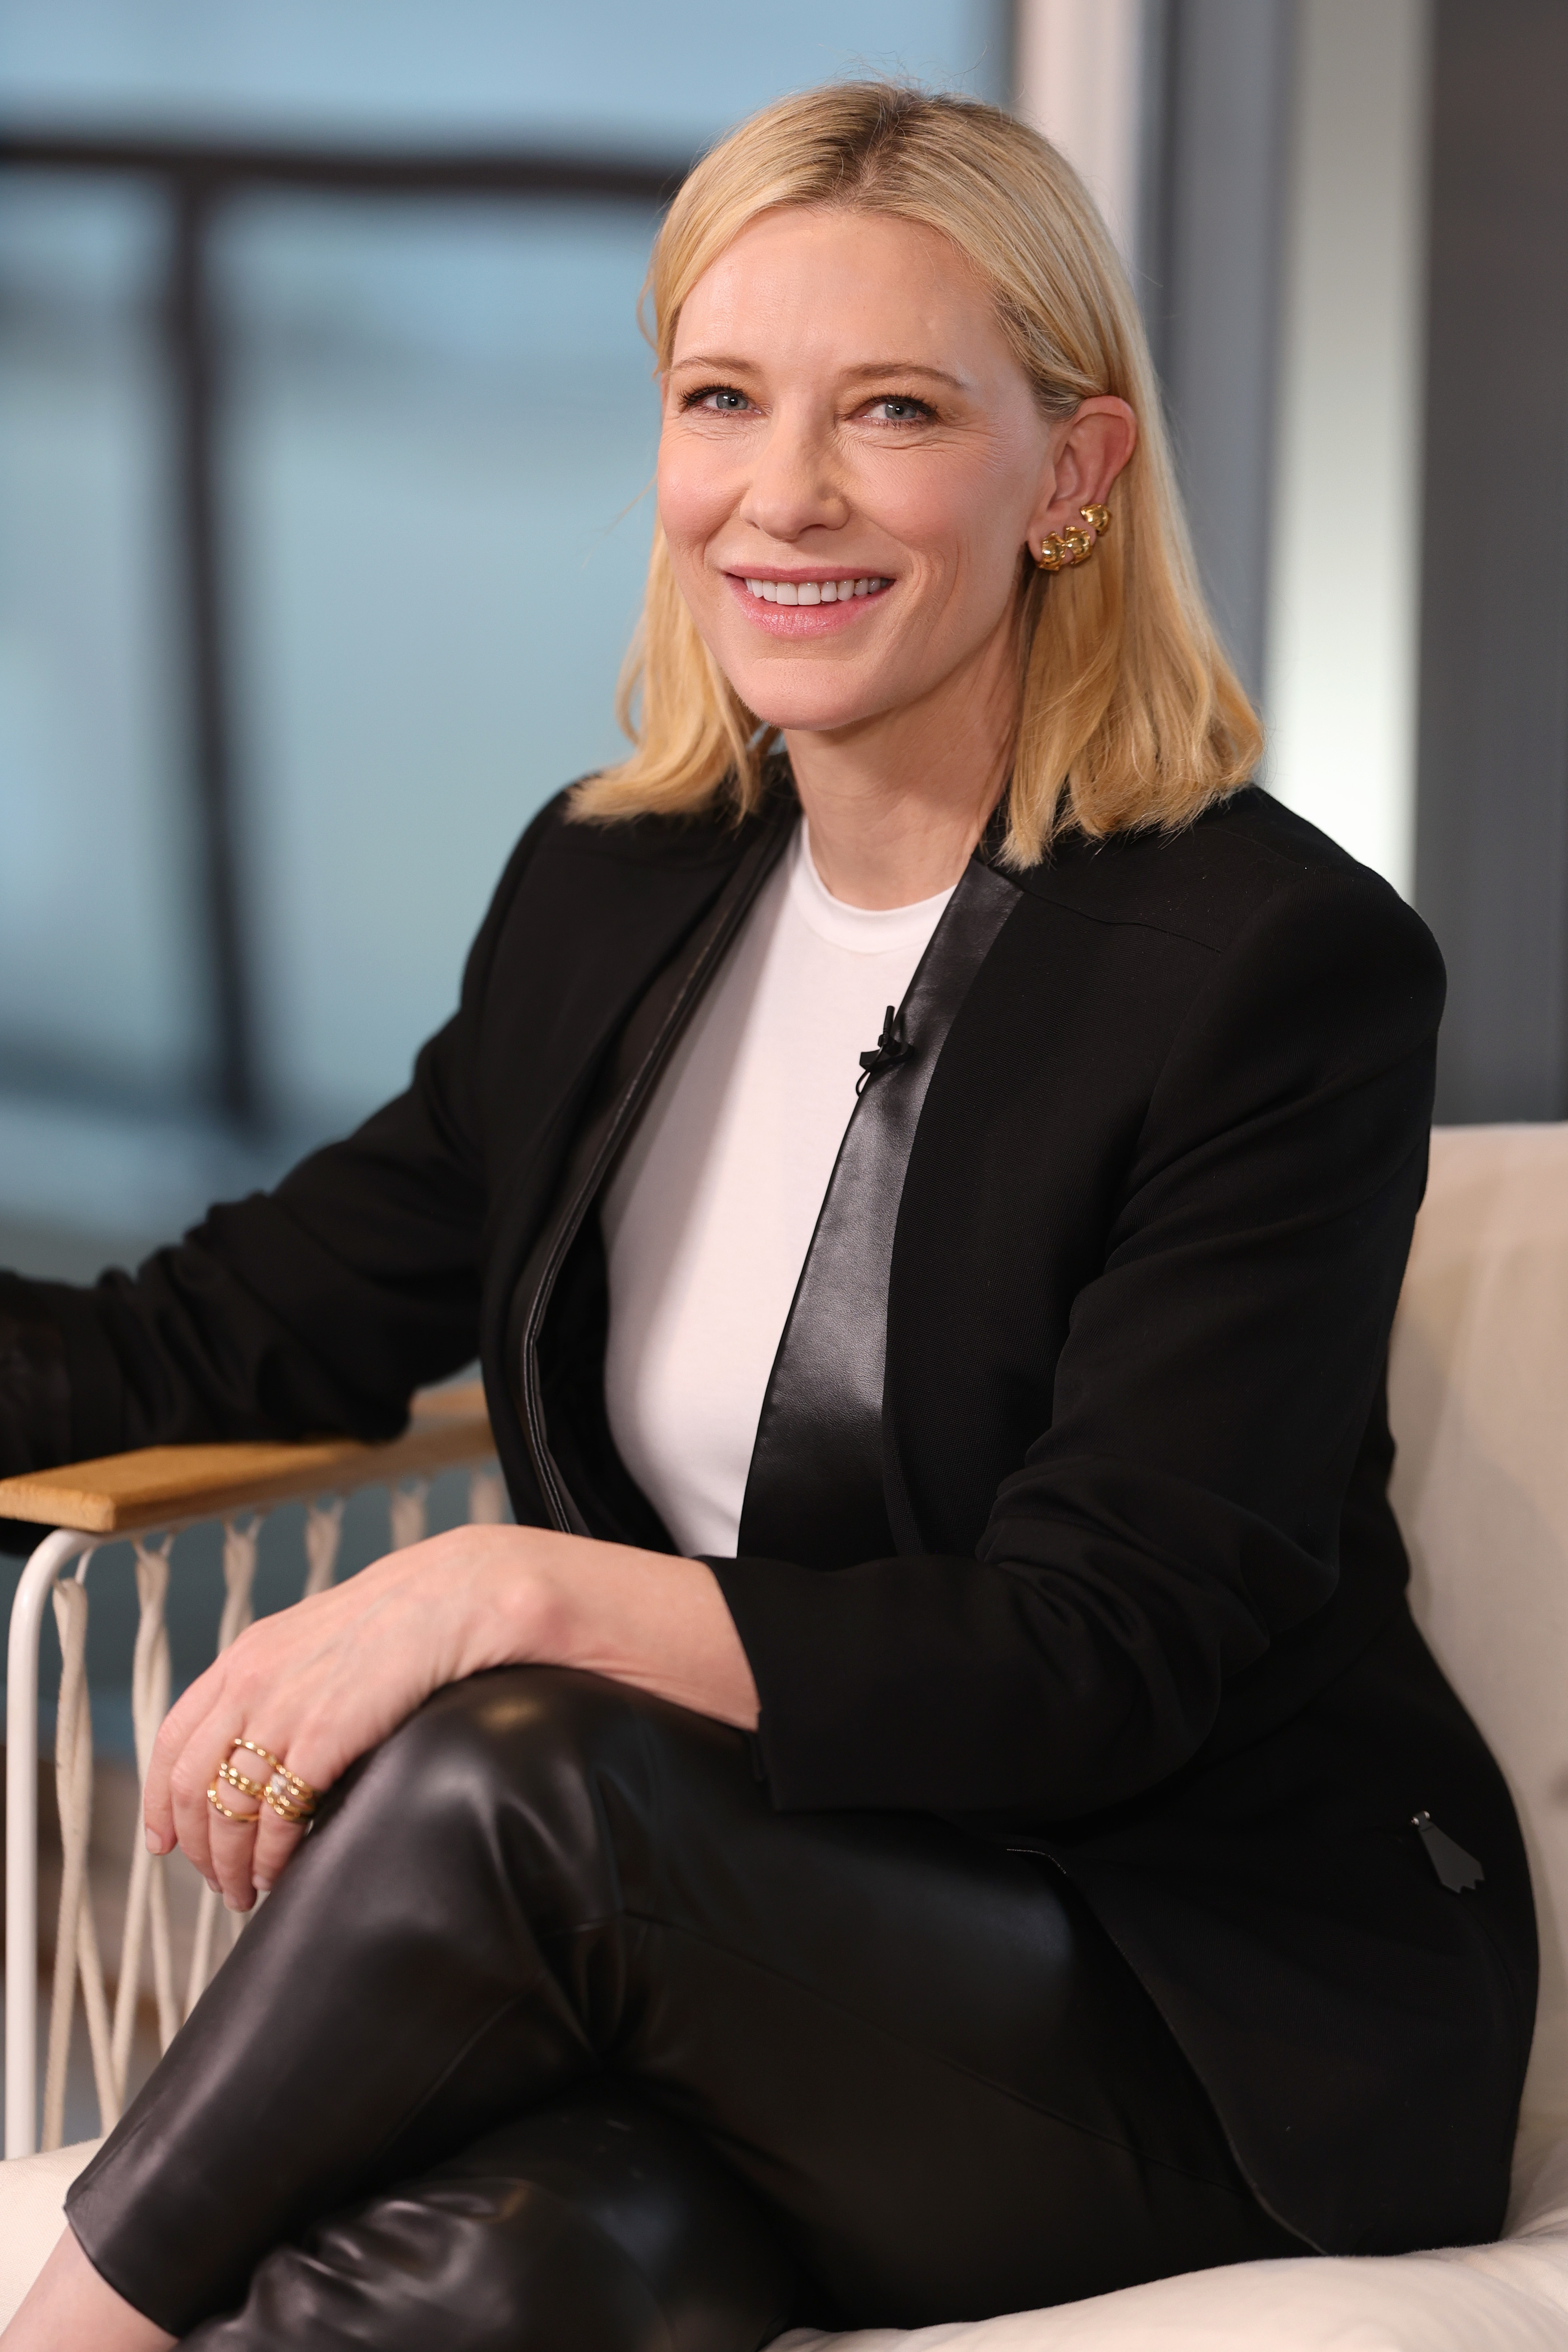 Cate Blanchett attends "Kering Women In Motion Talk" in Cannes, France on May 20, 2023 | Source: Getty Images